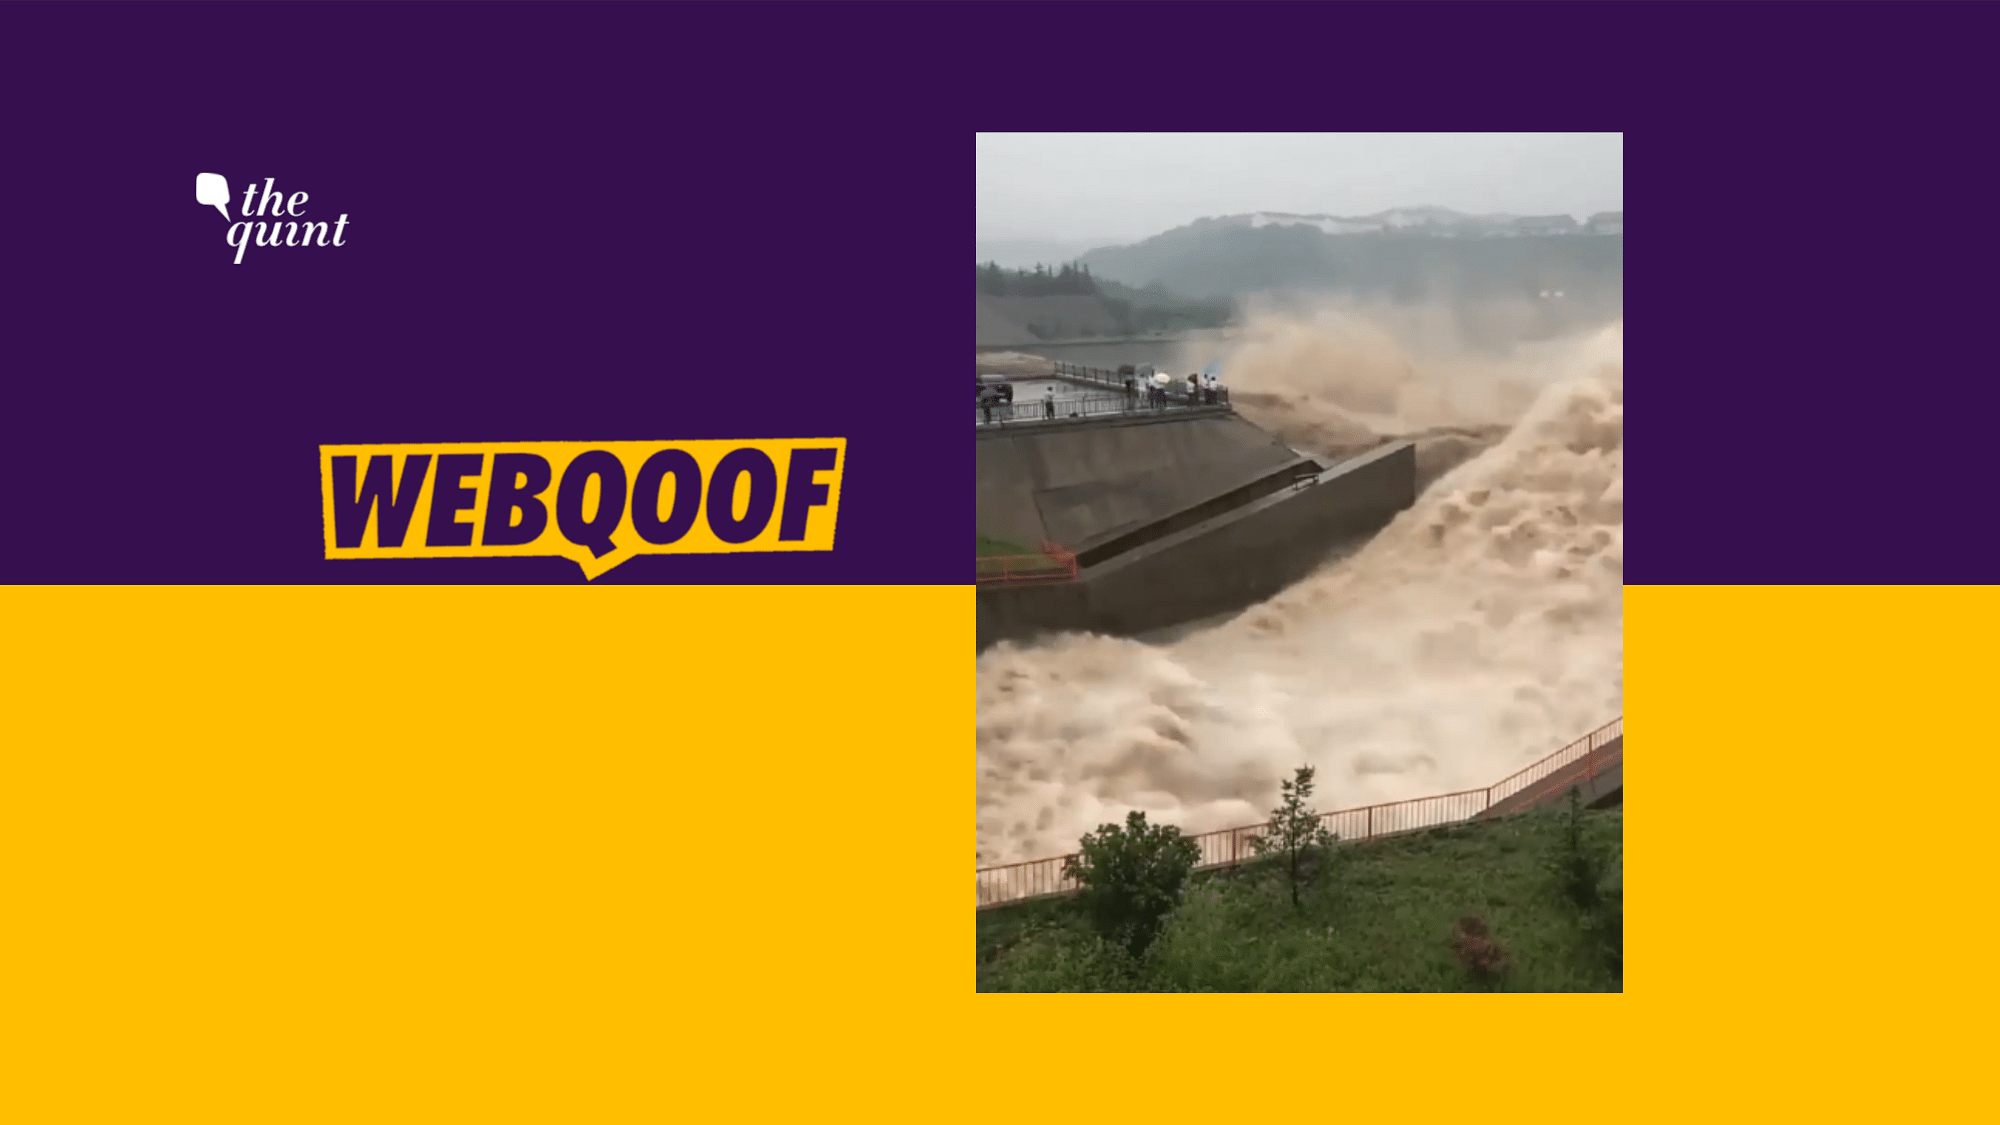 A video on social media falsely claimed that it was from Pawna dam near Pune.